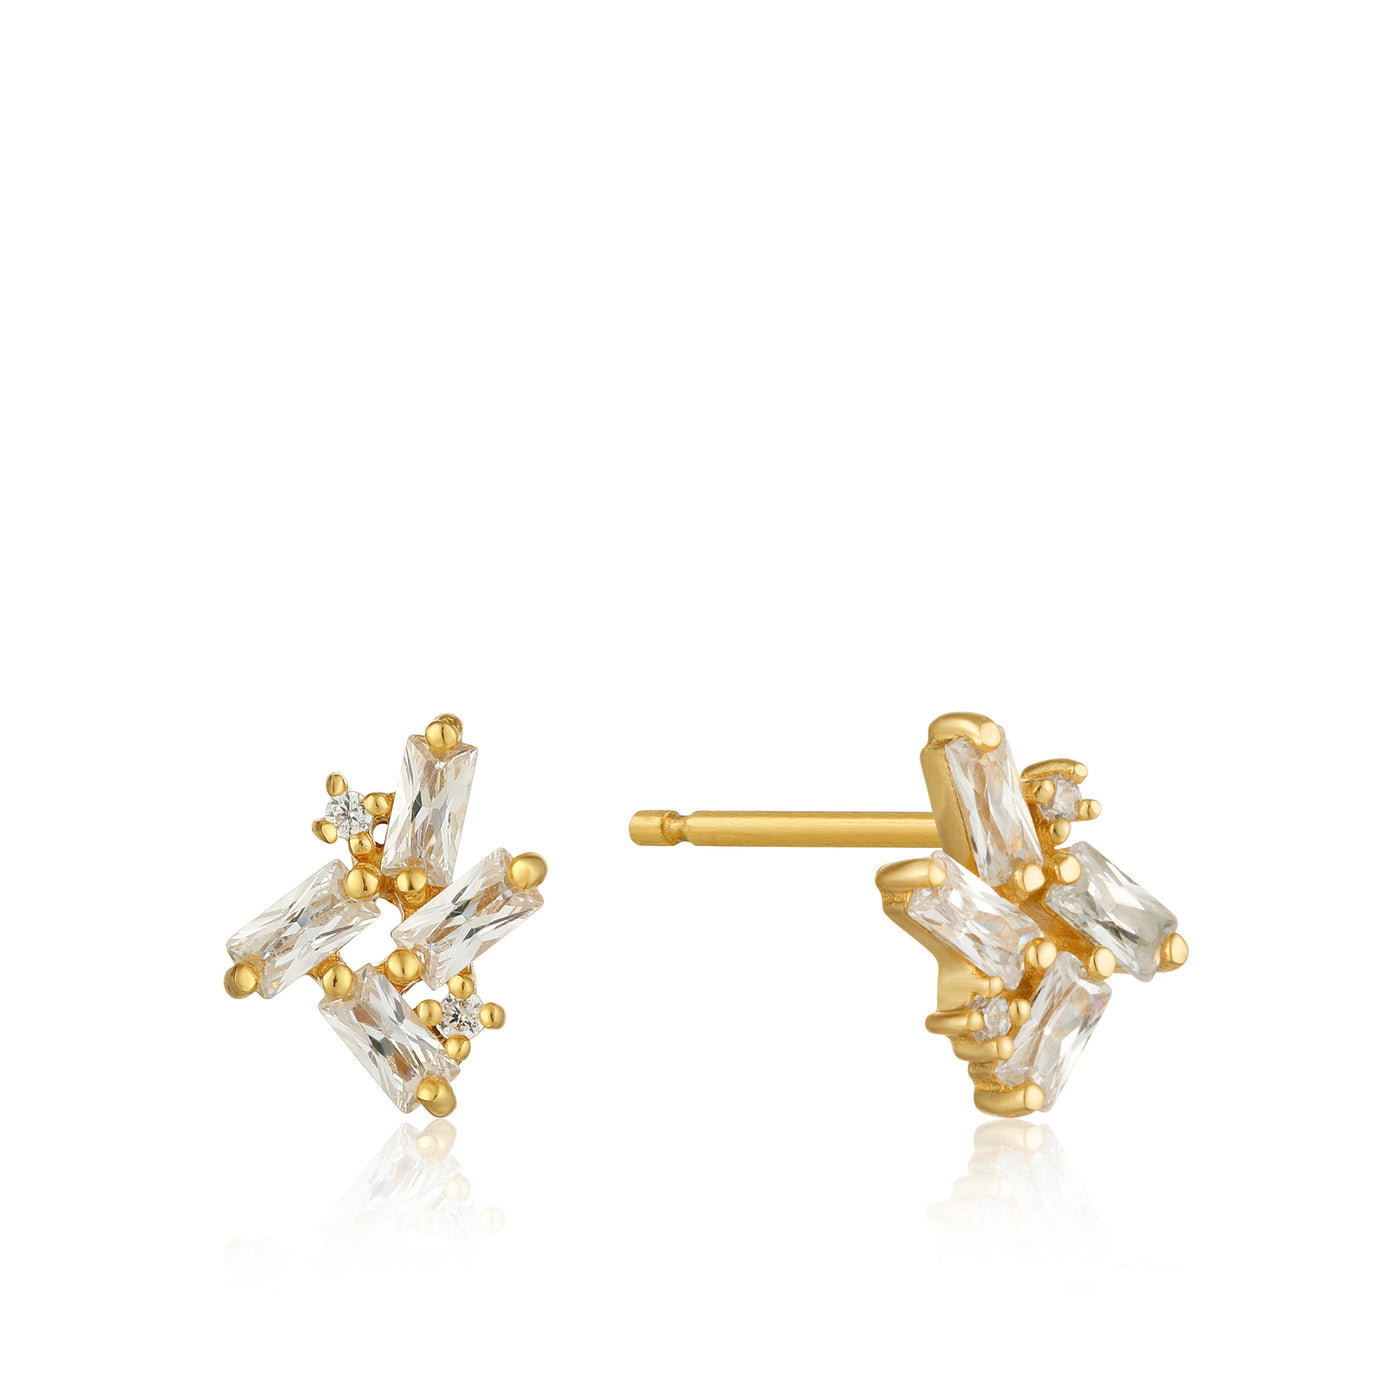 Ania Haie Yellow Gold Cluster Earrings  E018-05G